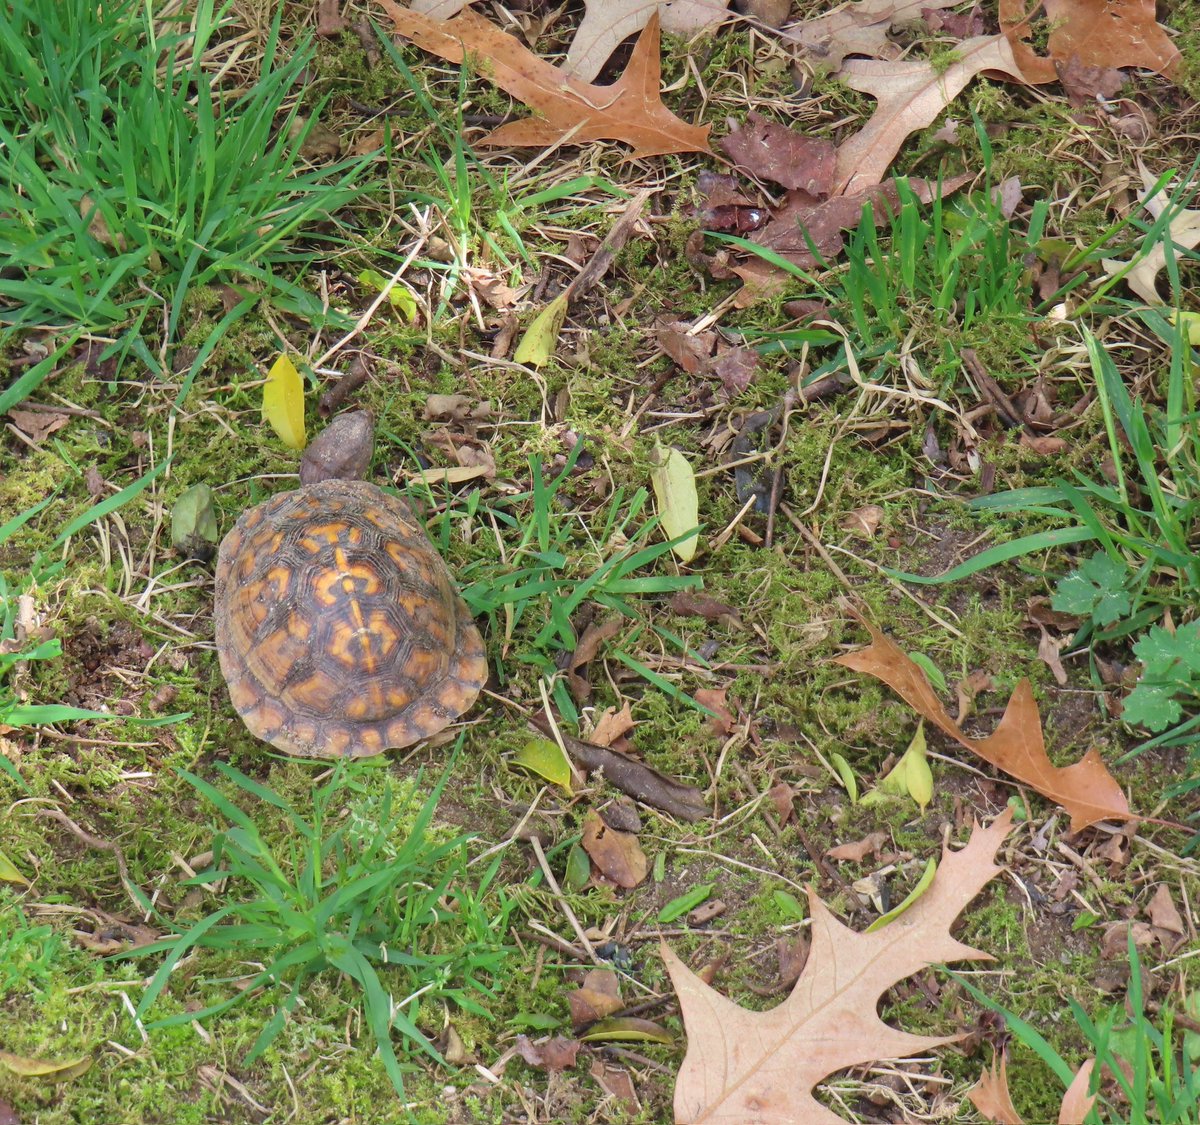 Very exciting to see the first box turtle emerge in our yard this season! Somewhat young, and I think female? We generally have 5-6 box turtle residents. #turtles #wildlife #animals #nature